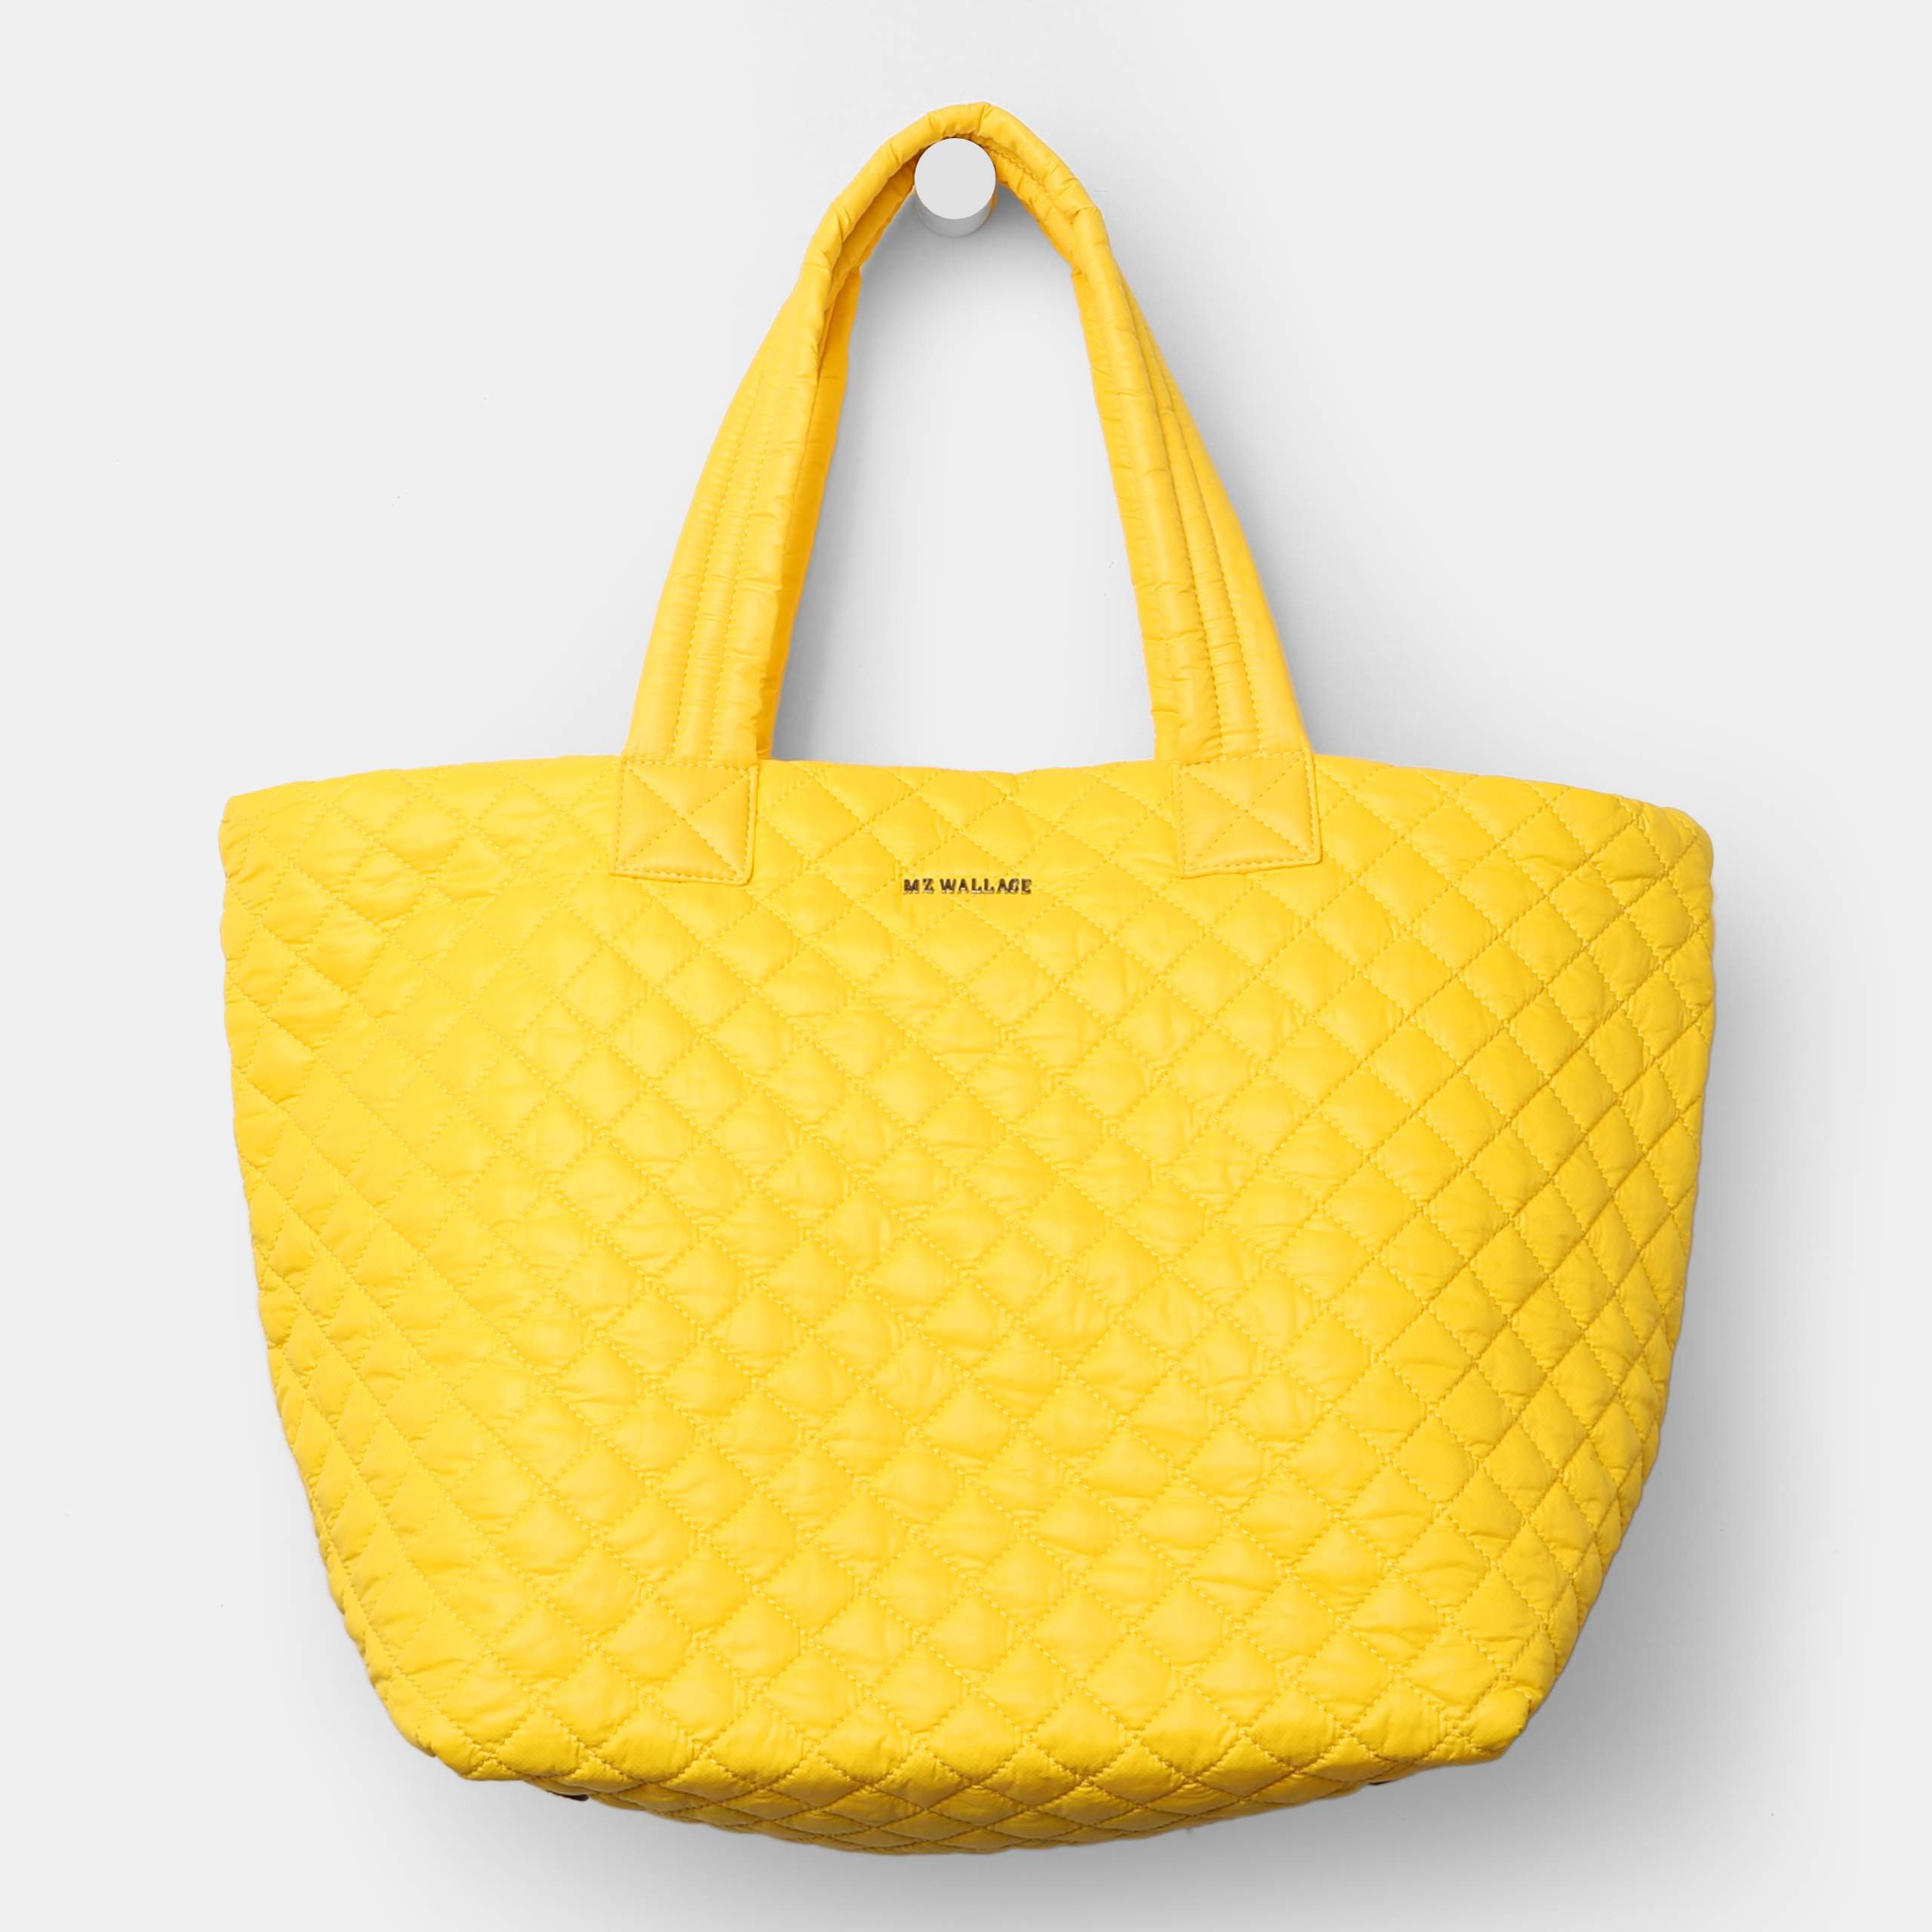 Mz wallace Large Metro Tote Bright Yellow Quilted Oxford Nylon in ...